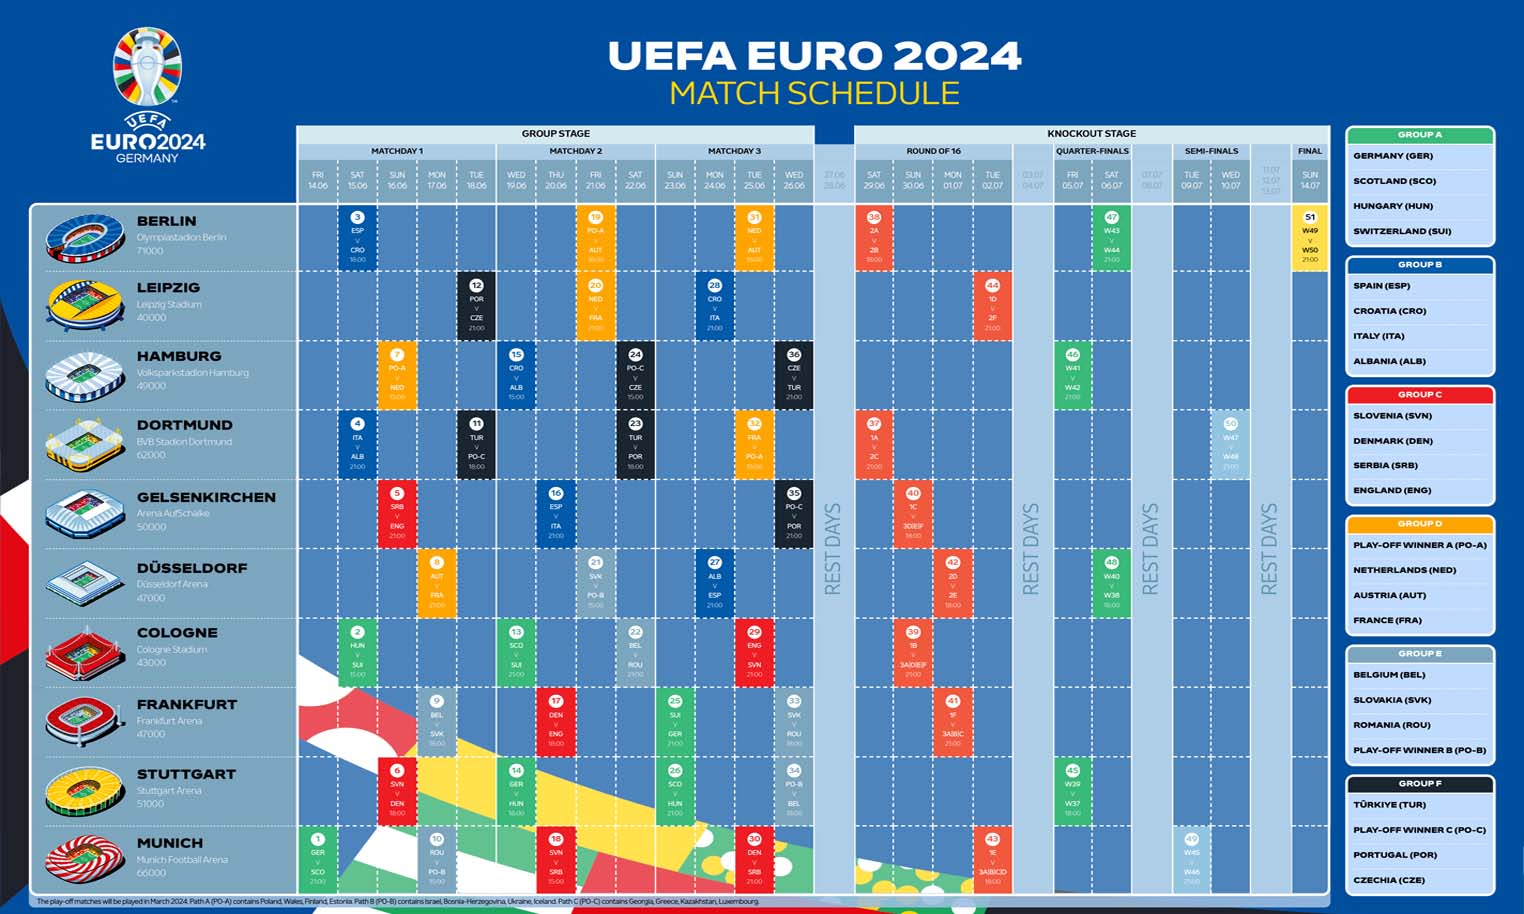 European Football Championship 2024 Germany - Everything about EURO